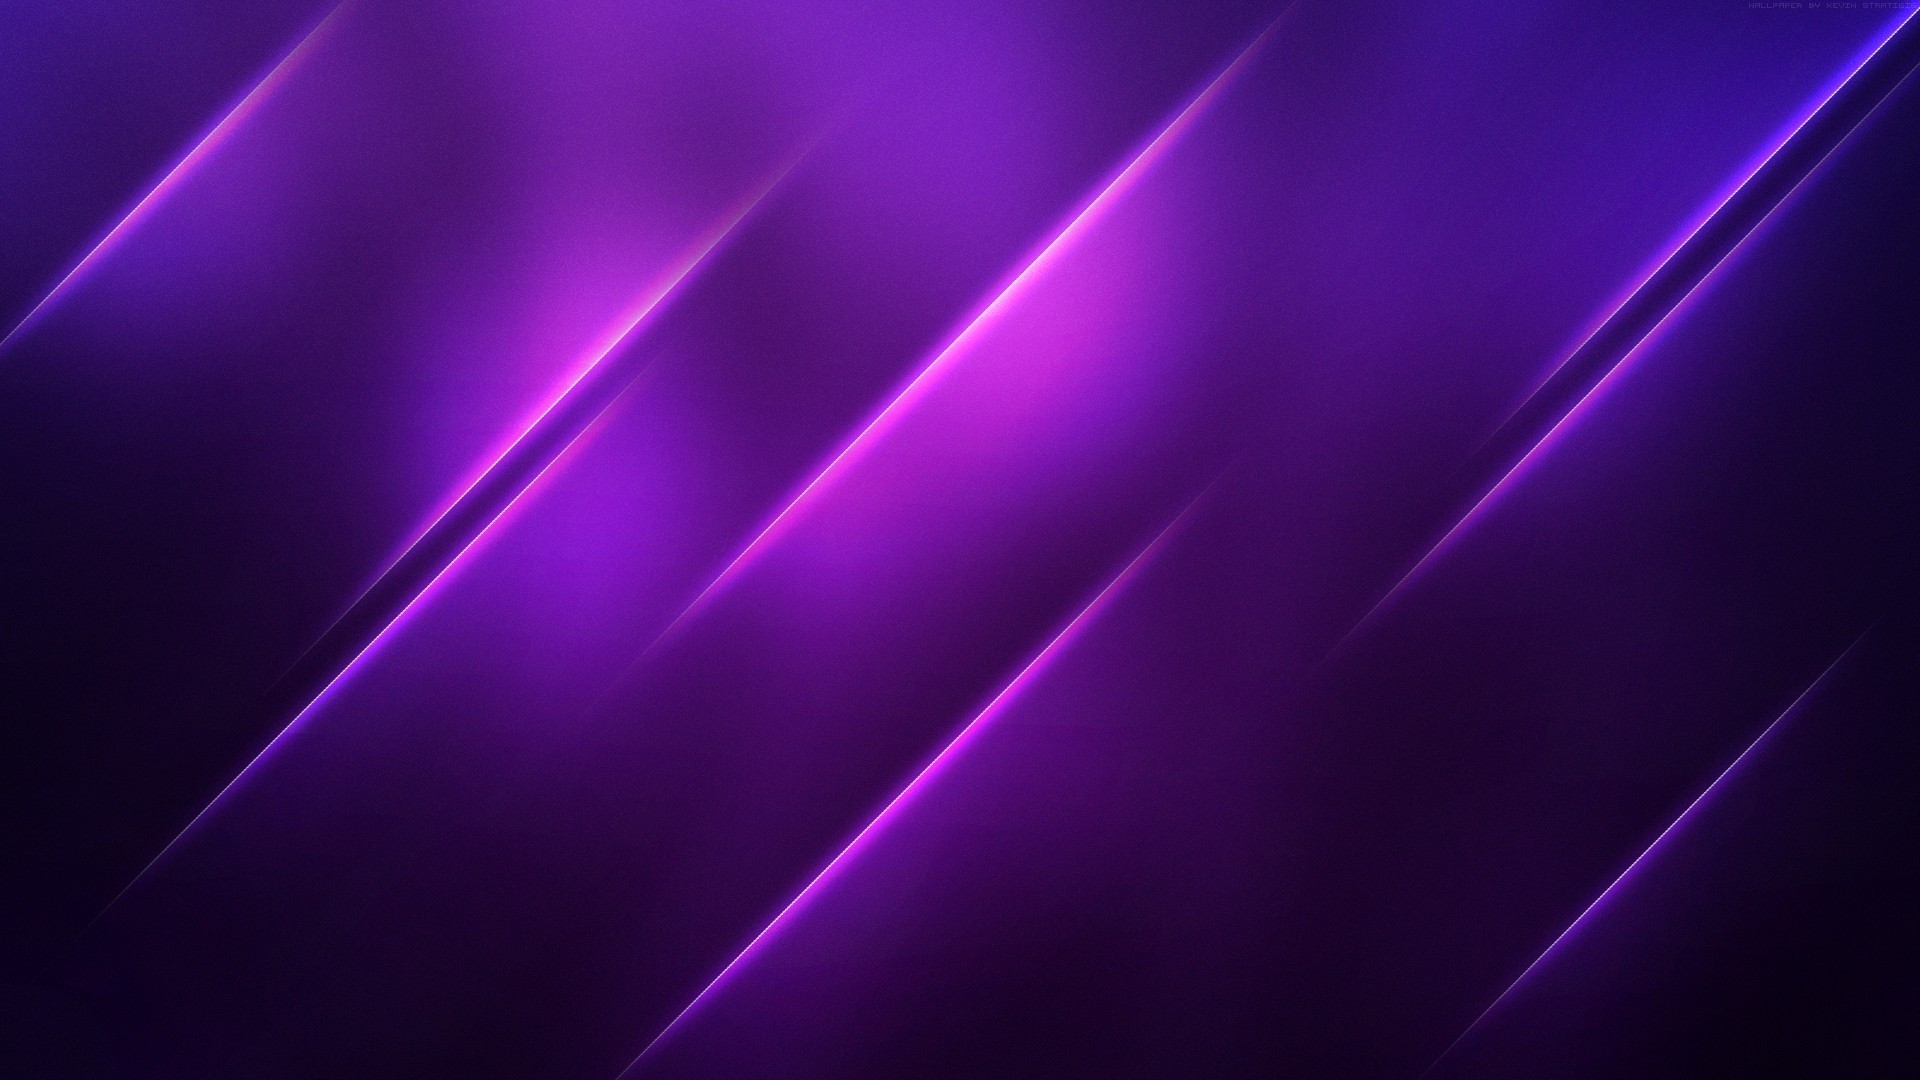 Purple Desktop Wallpaper with high-resolution 1920x1080 pixel. You can use this wallpaper for your Windows and Mac OS computers as well as your Android and iPhone smartphones